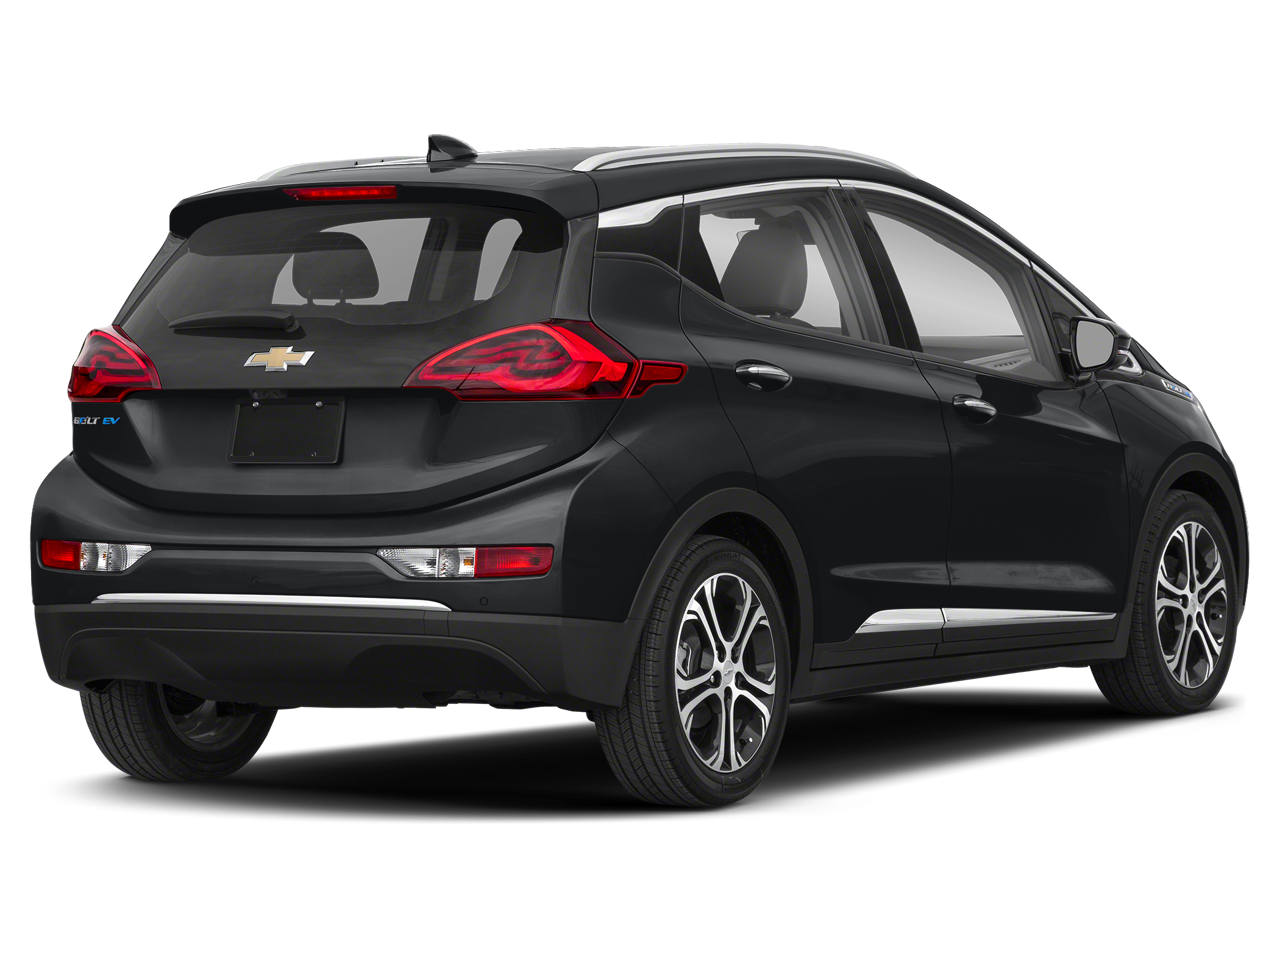 Used 2021 Chevrolet Bolt EV Premier with VIN 1G1FZ6S07M4109286 for sale in Upland, CA